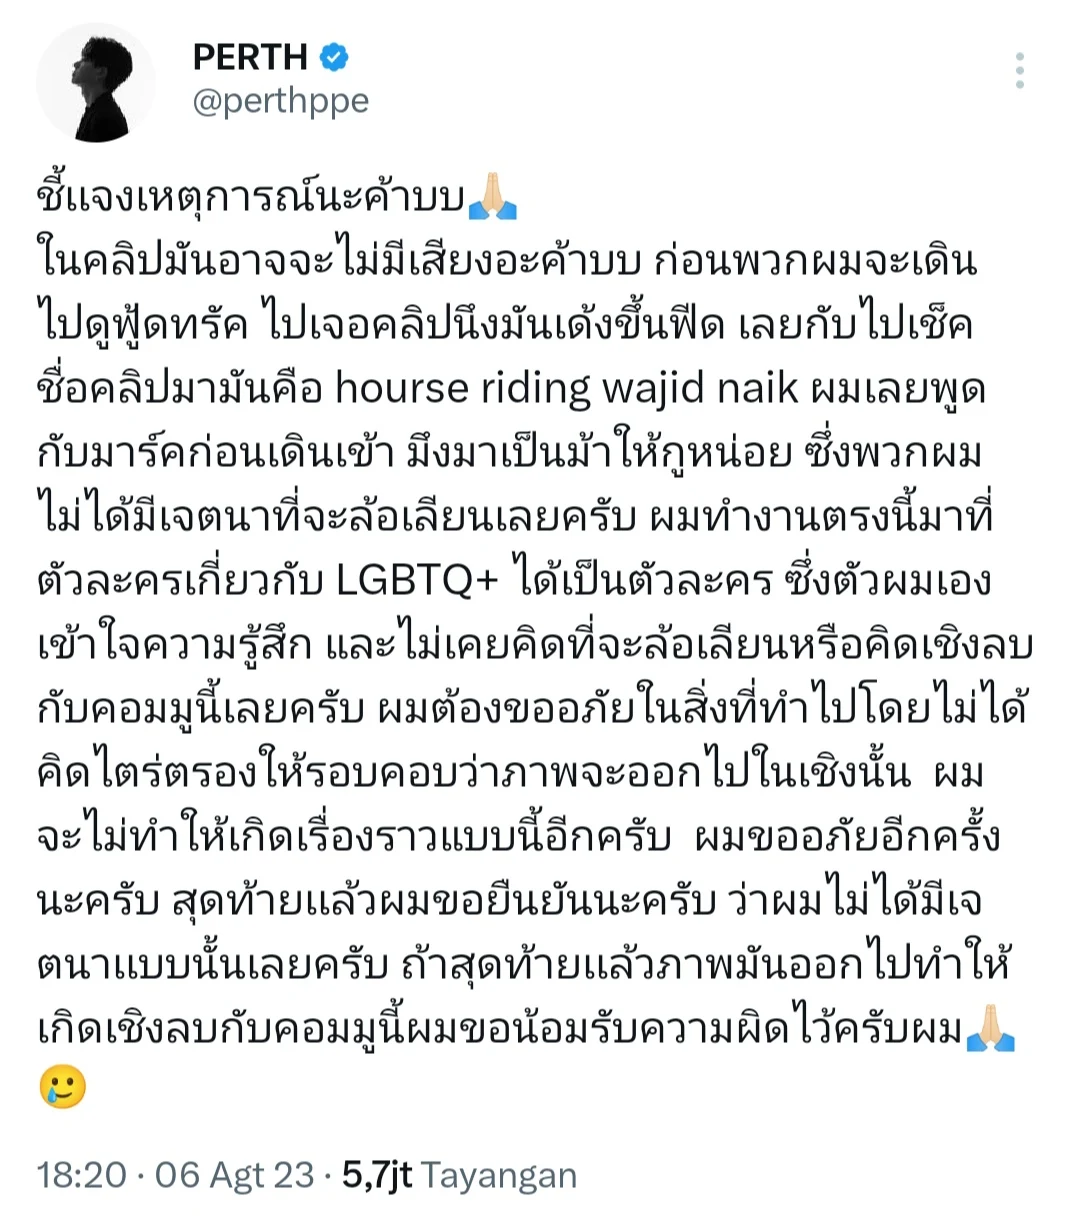 Perth Tanapon Faces Criticism from Netizens for Alleged Homophobia